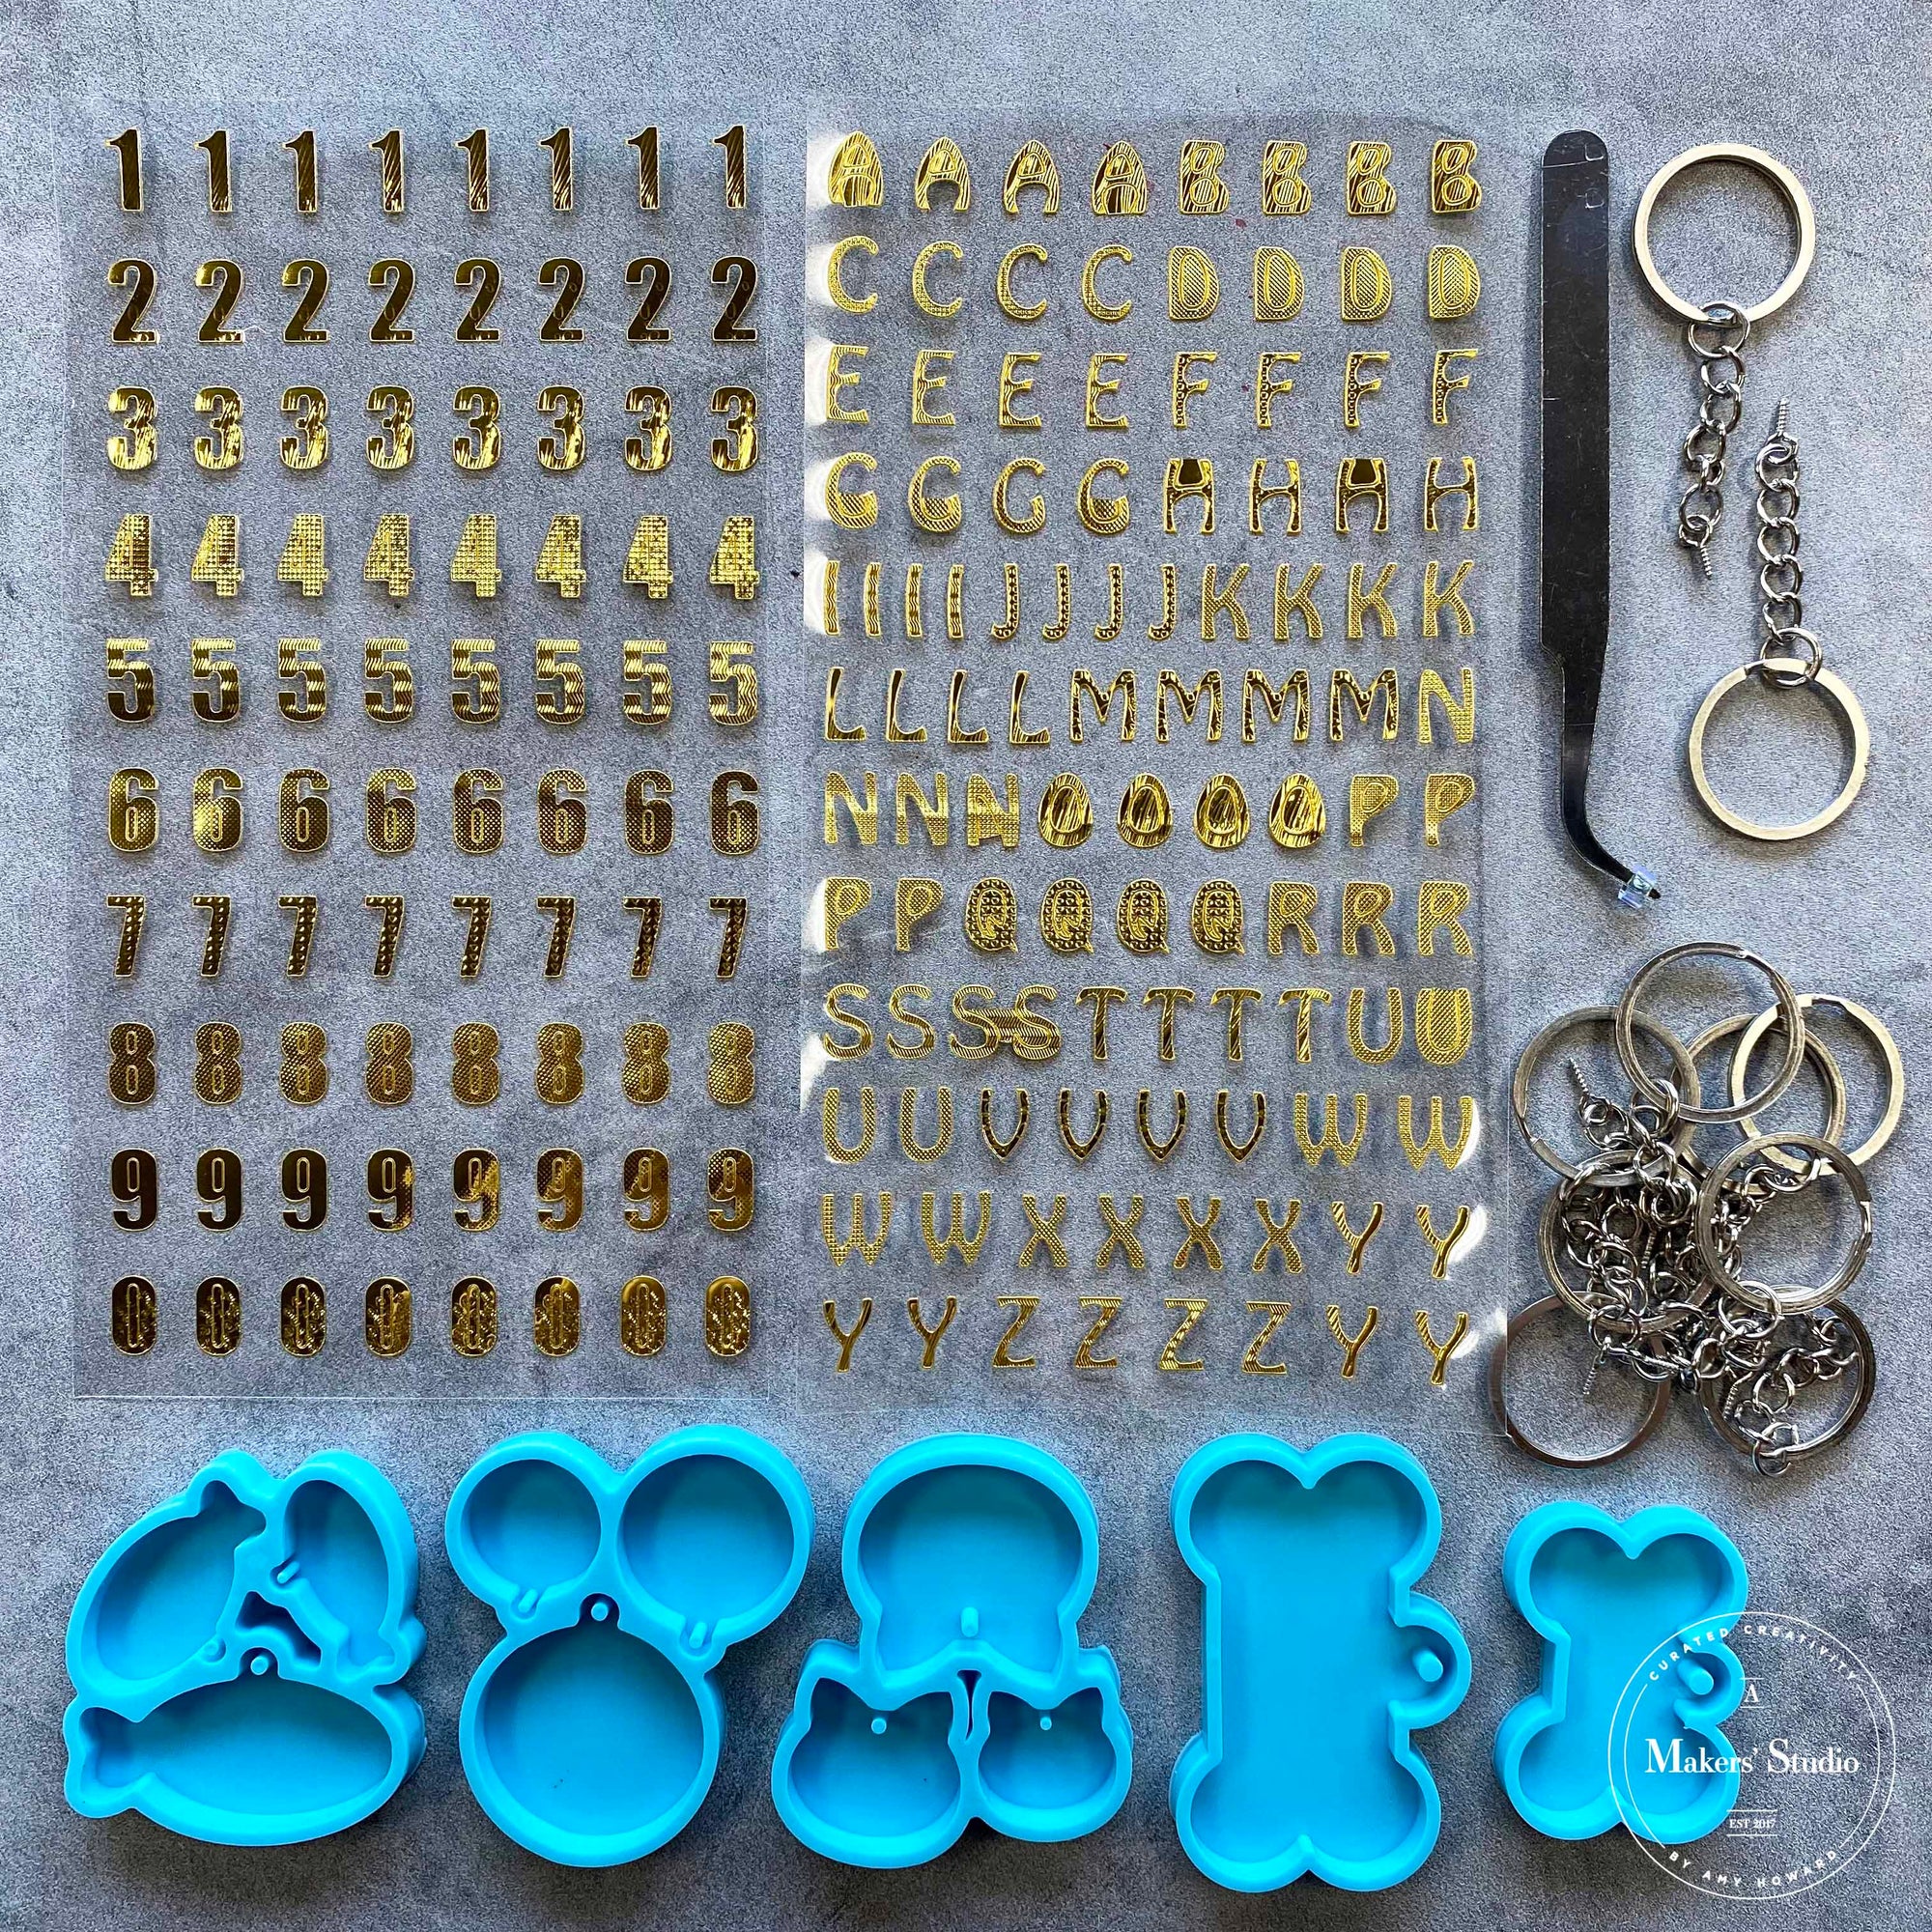 Dog Tag Mold Project